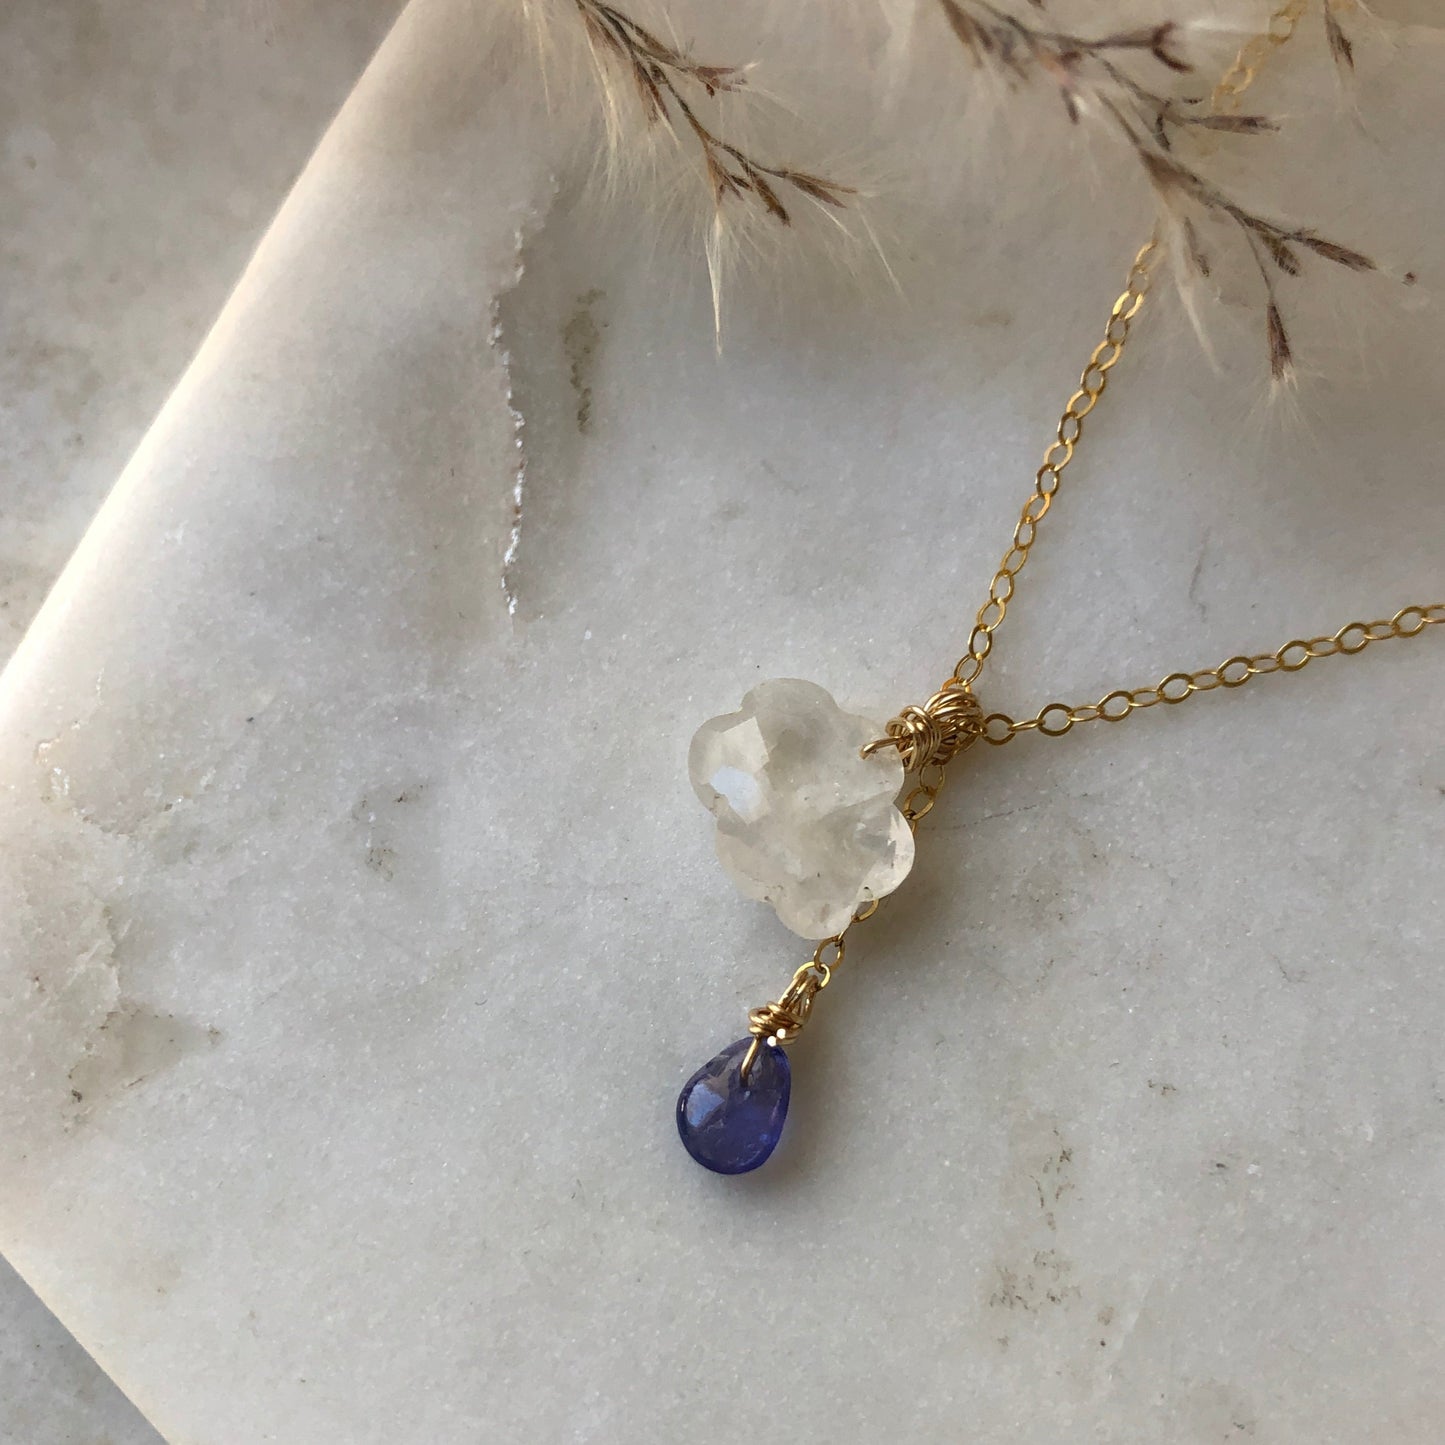 Head in the Clouds Necklace